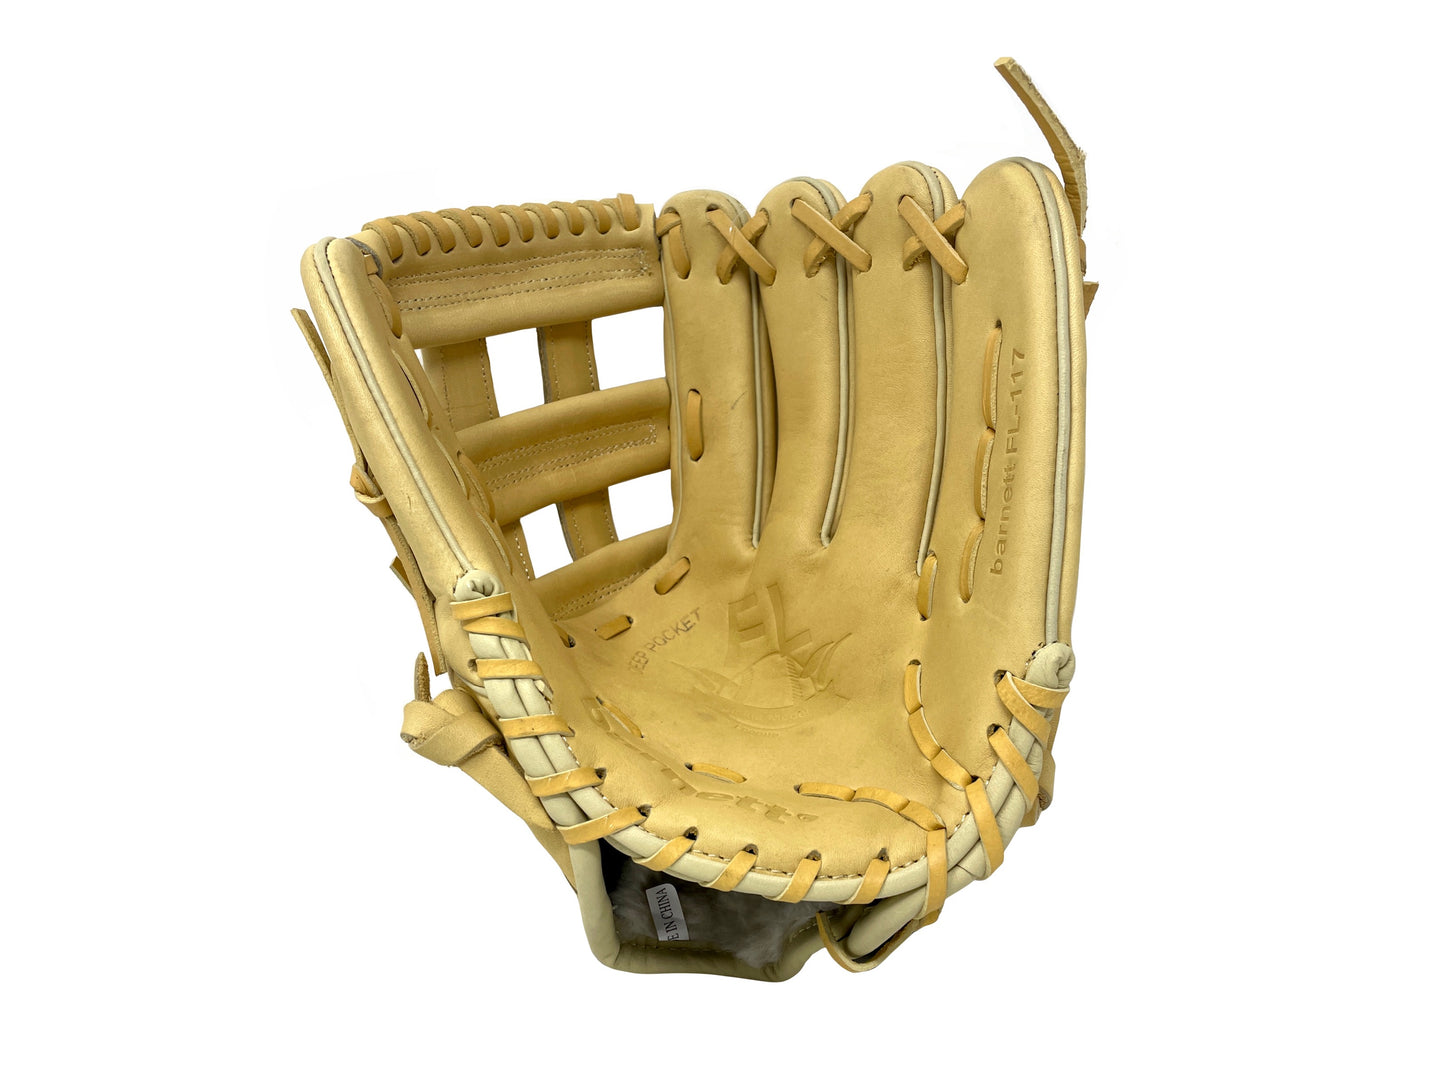 FL-117 High quality baseball and softball glove, leather, infield / fastpitch 11.7", Beige